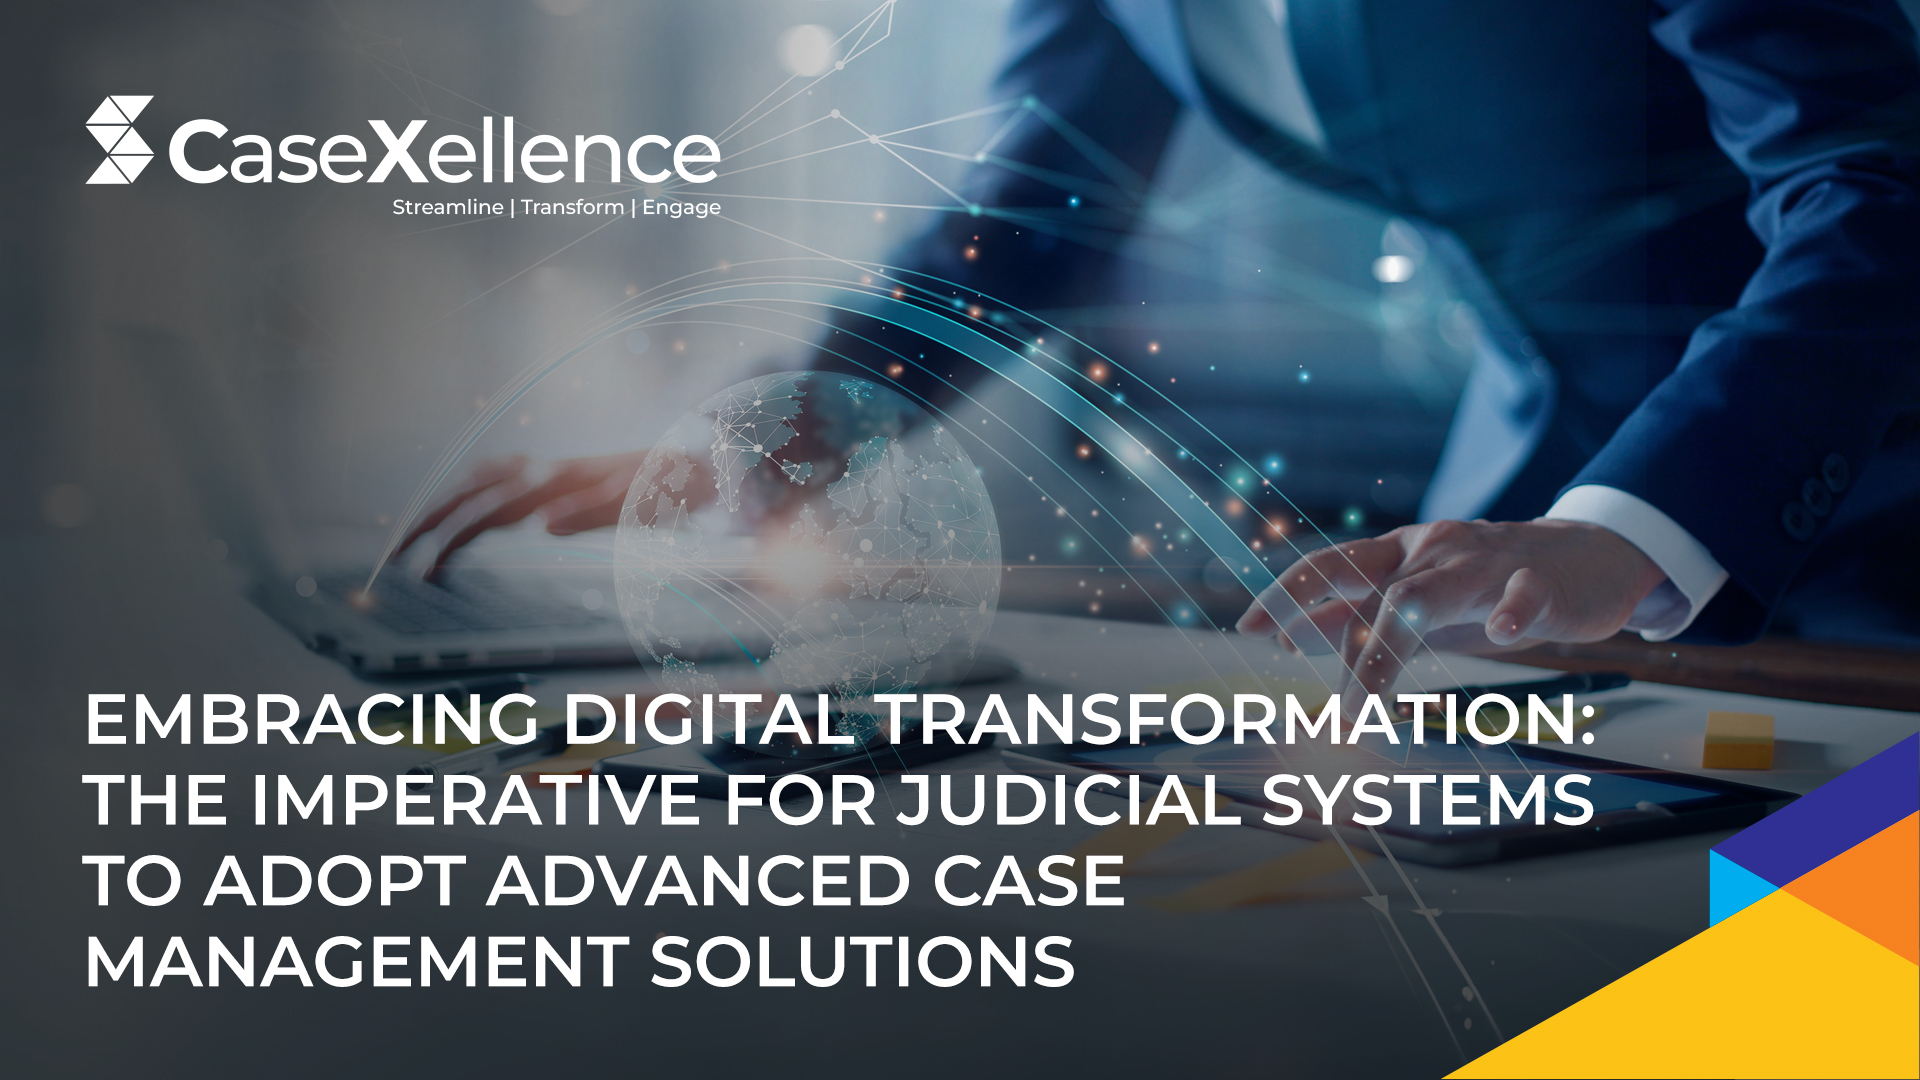 Embracing Digital Transformation: The Imperative for Judicial Systems to Adopt Advanced Case Management Solutions